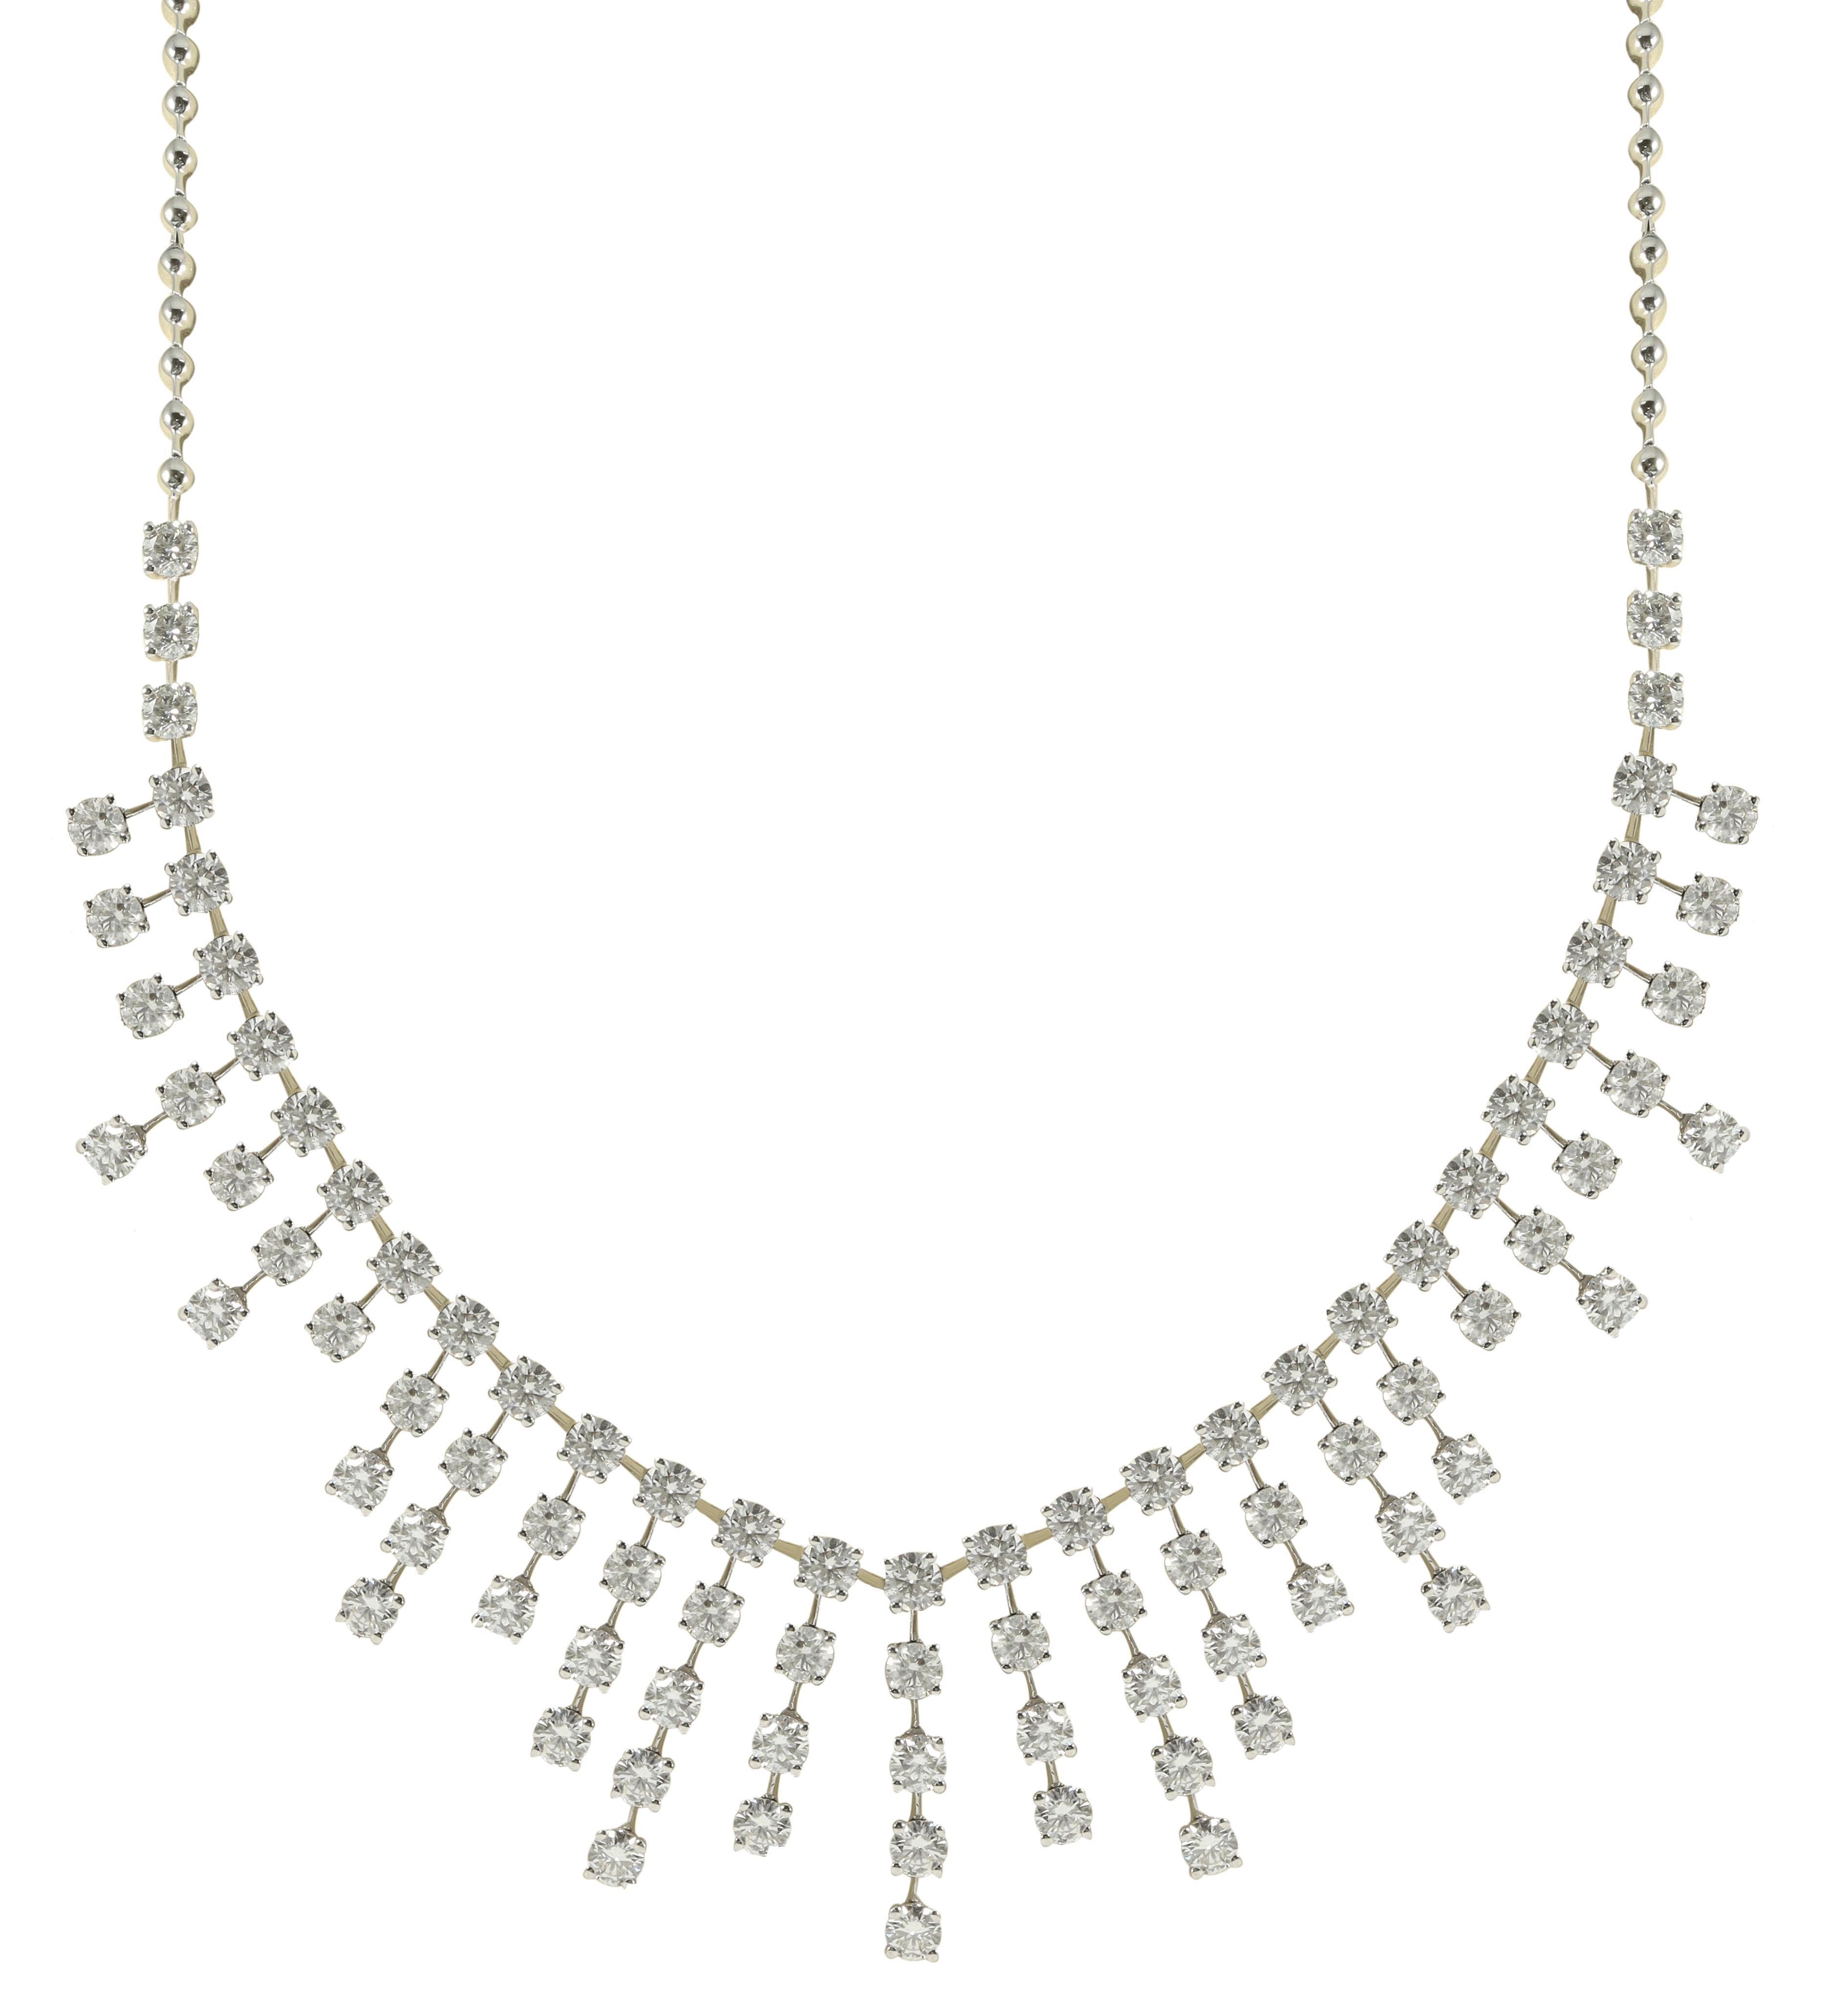 18kt white gold fashion necklace featuring 15.84 cts of round diamonds